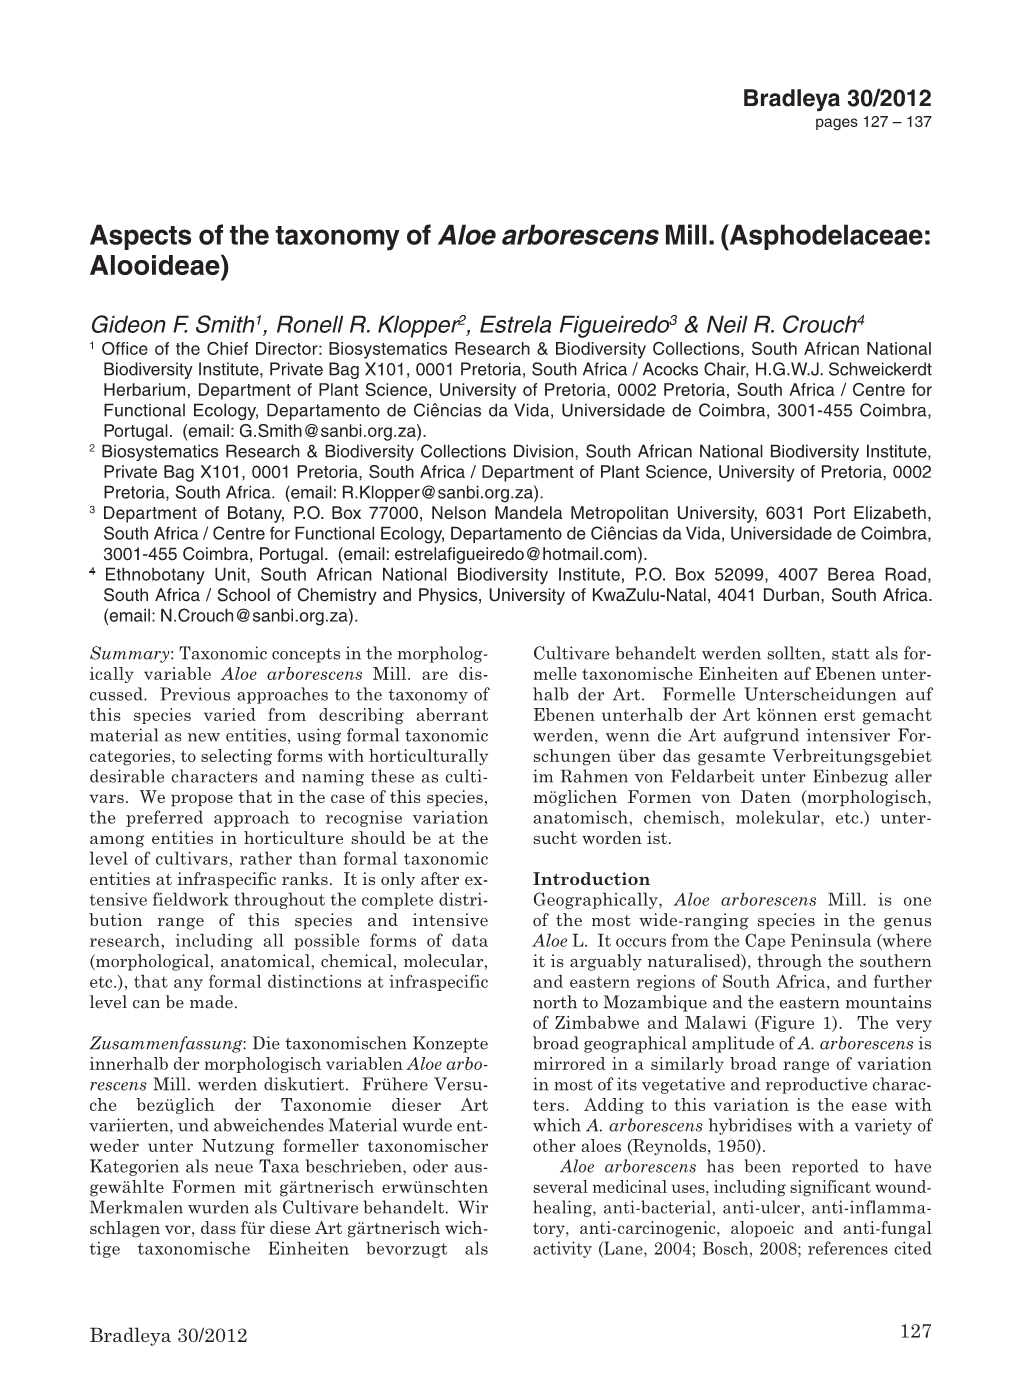 Aspects of the Taxonomy of Aloe Arborescens Mill. (Asphodelaceae: Alooideae)